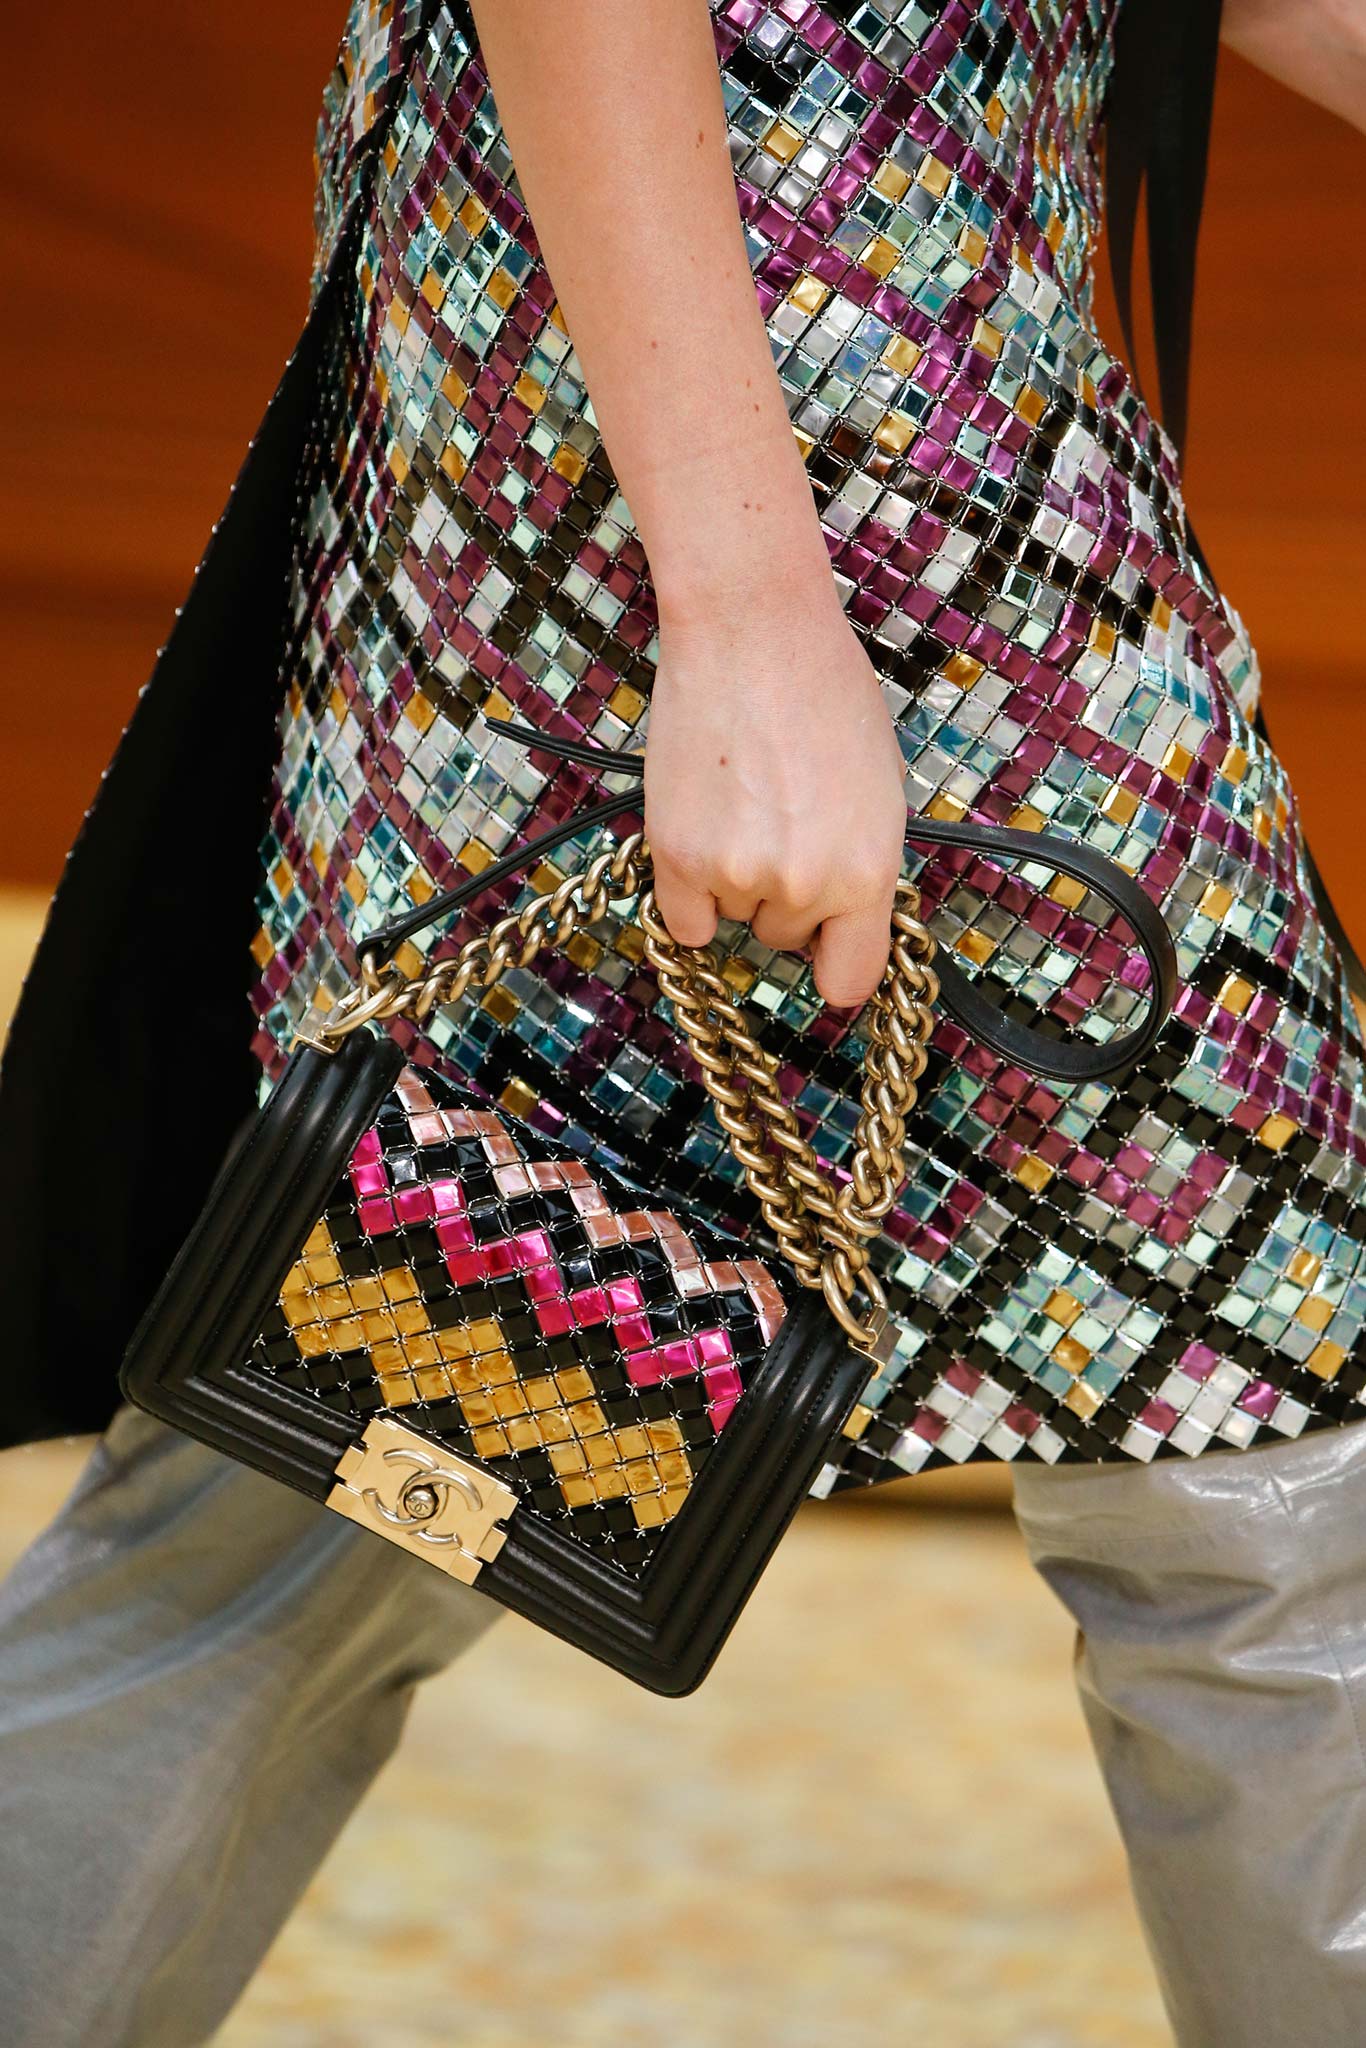 Chanel Fall/Winter 2015 Runway Bag Collection featuring the